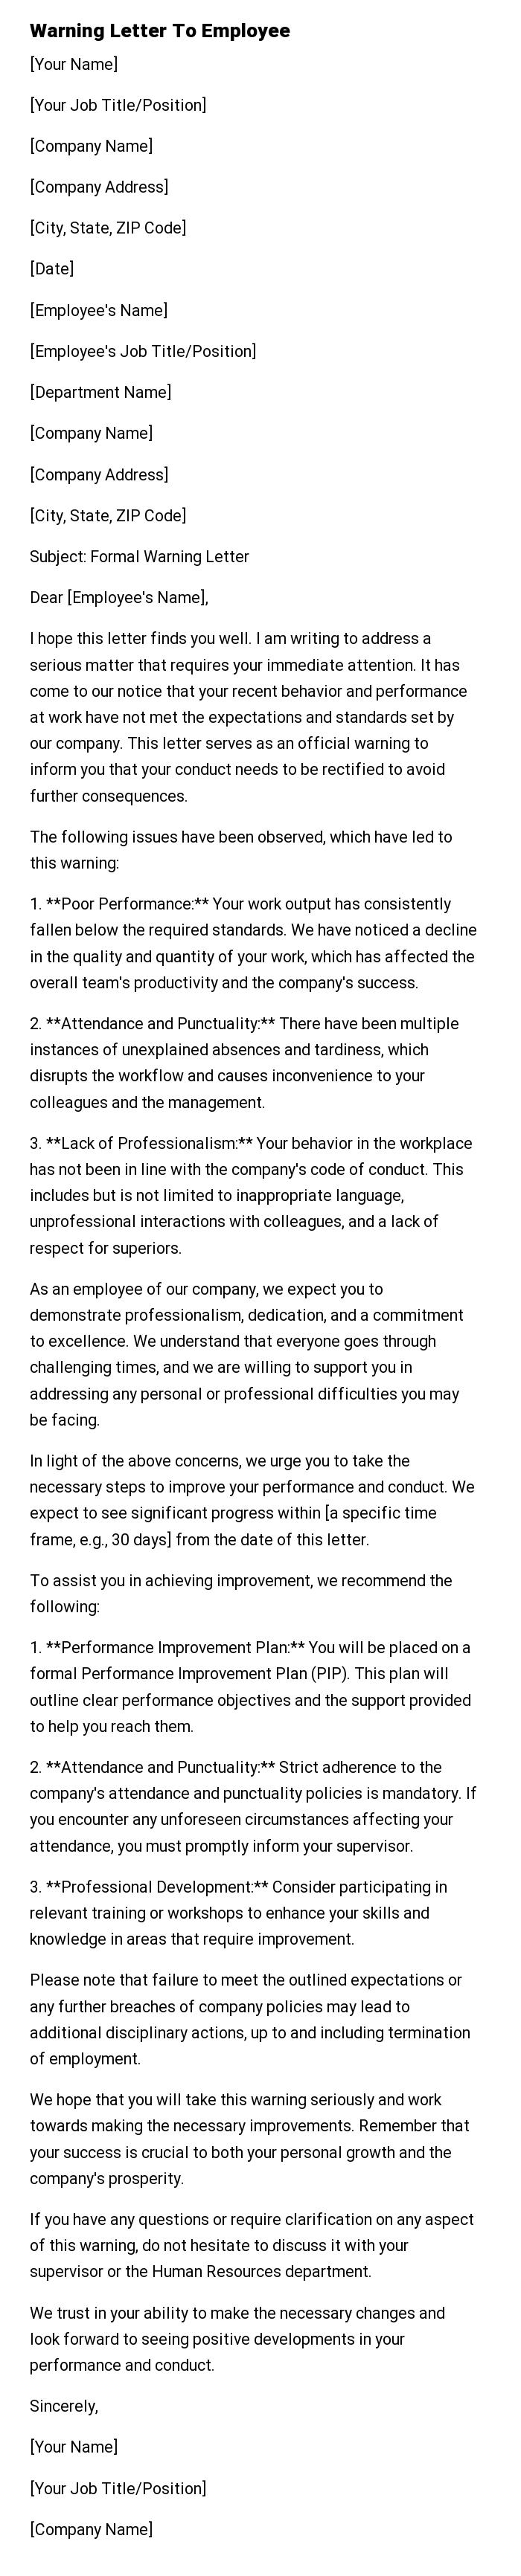 Warning Letter To Employee